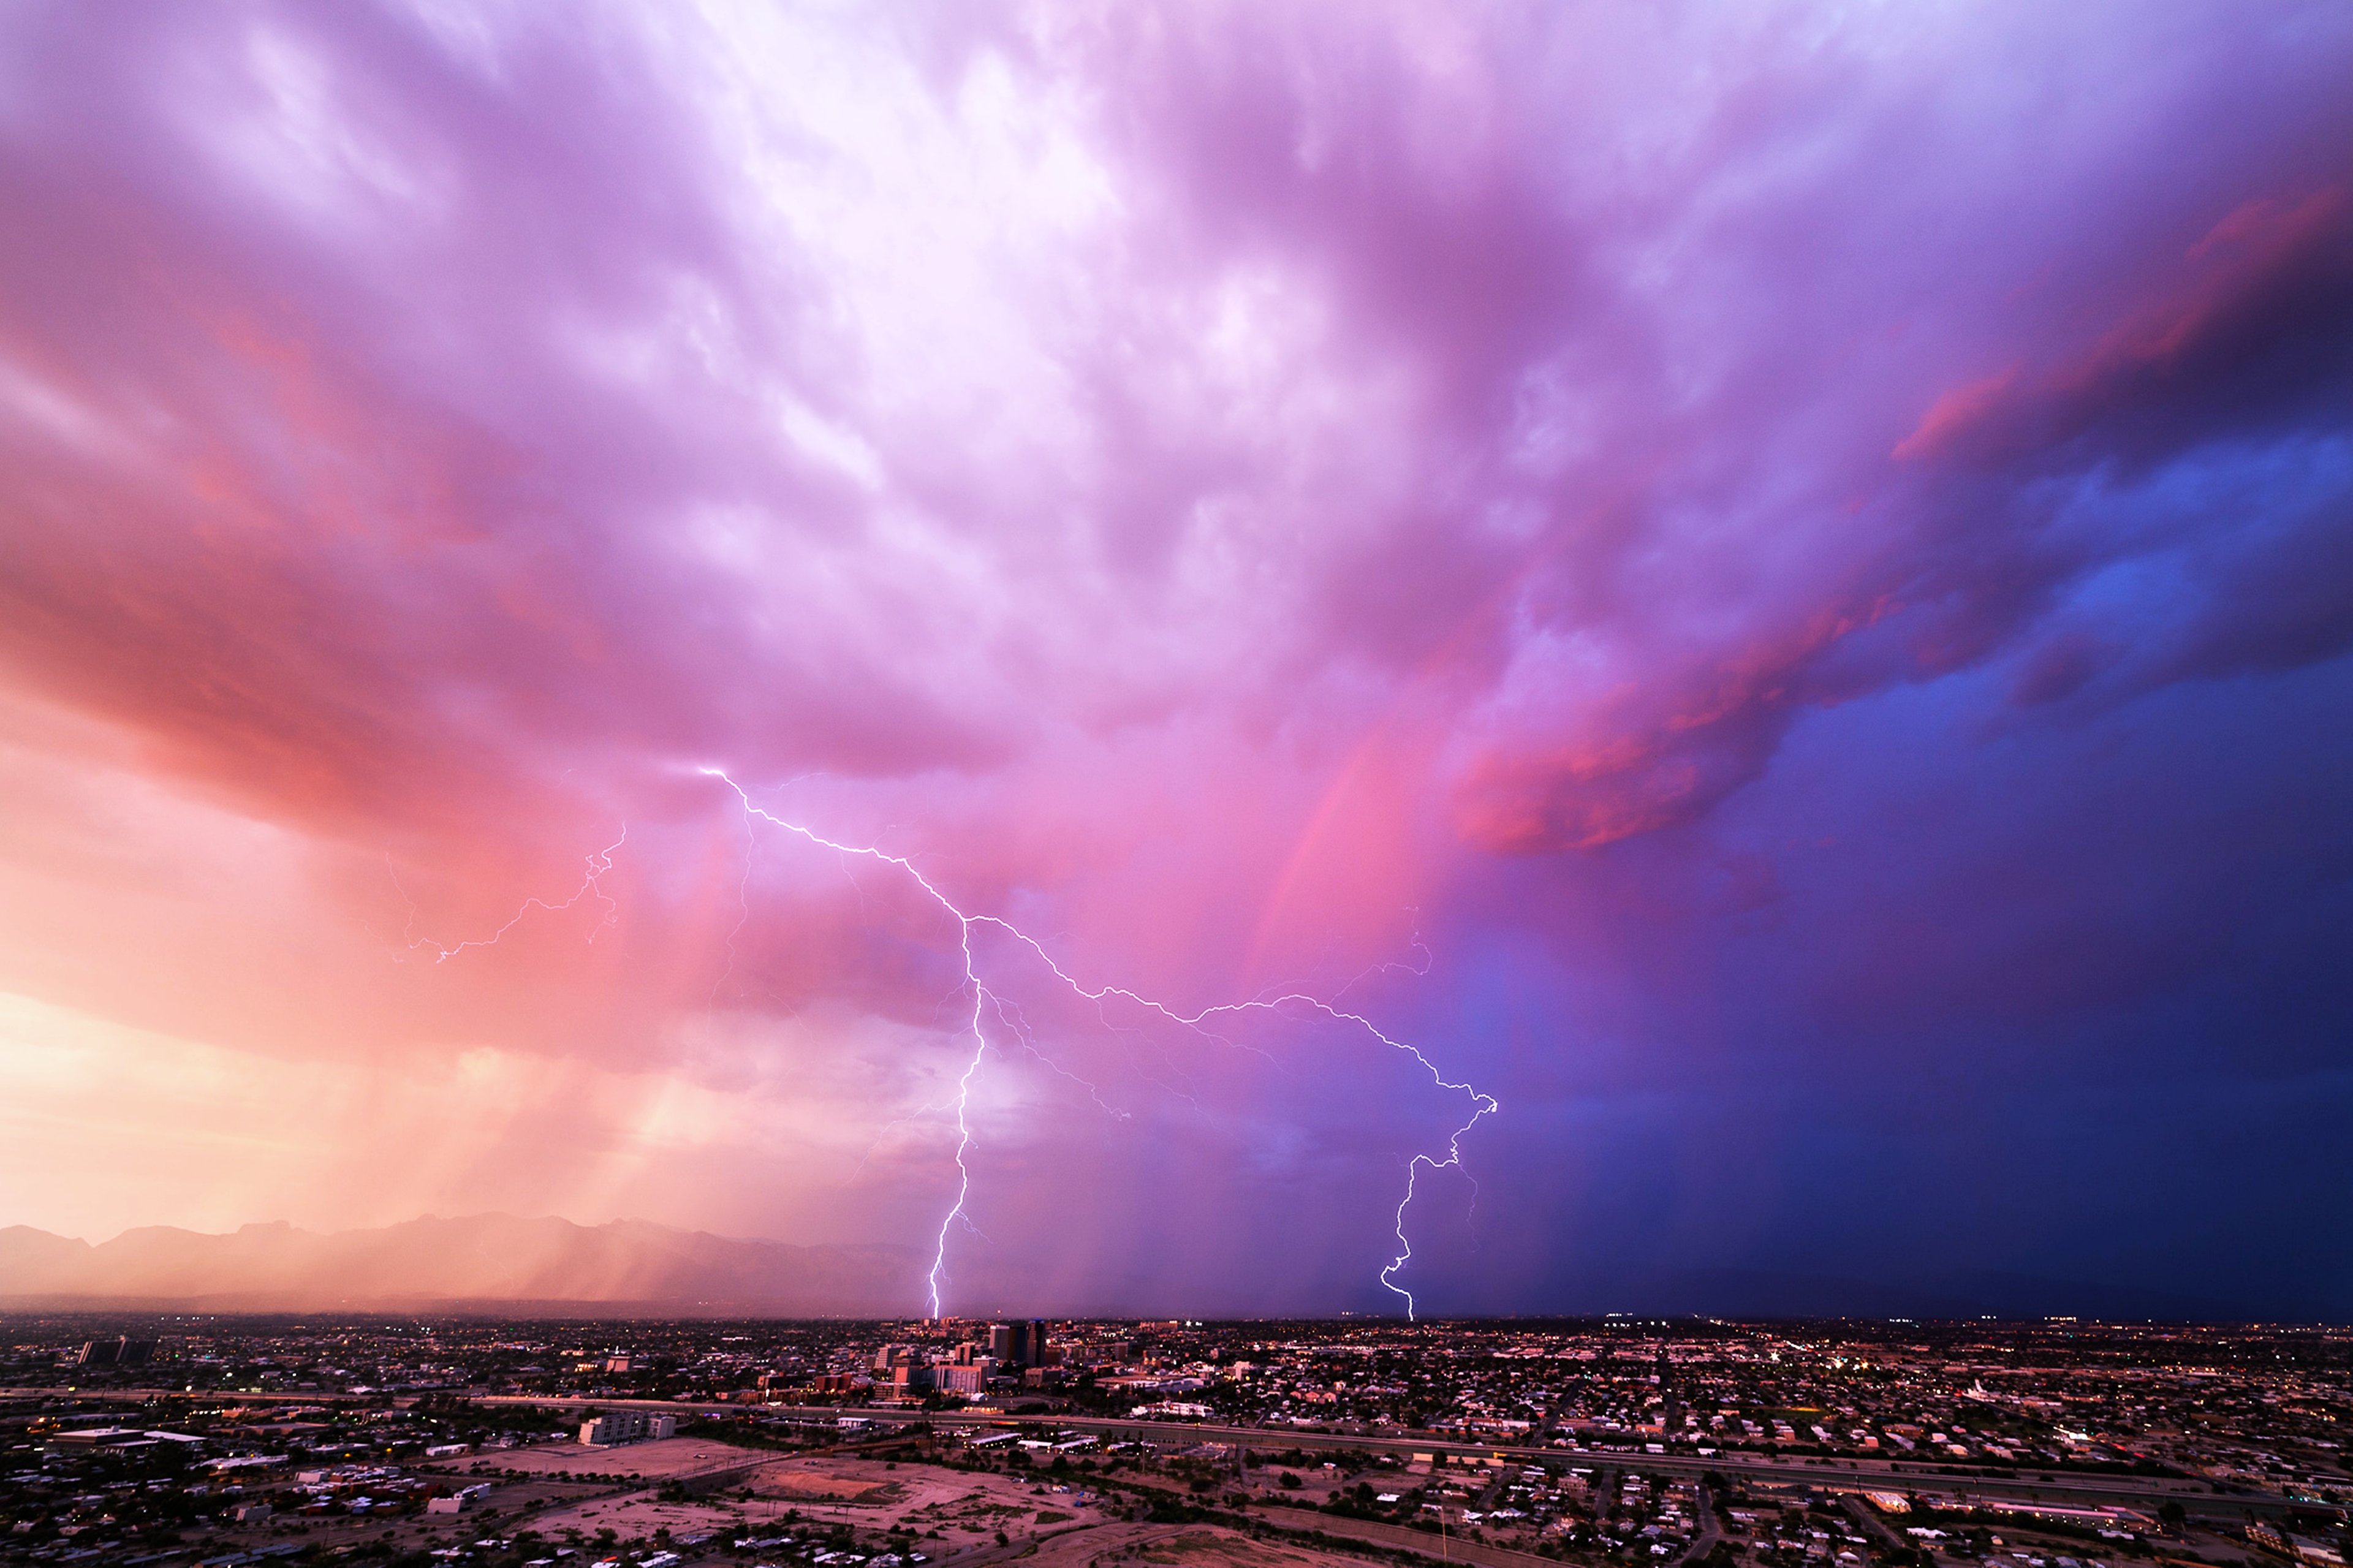 clouds, Sky, Town, Houses, Landscapes, Nature, Earth, Rain, Lightning, Thunders, Storms, City, Summer, Rainbow Wallpaper